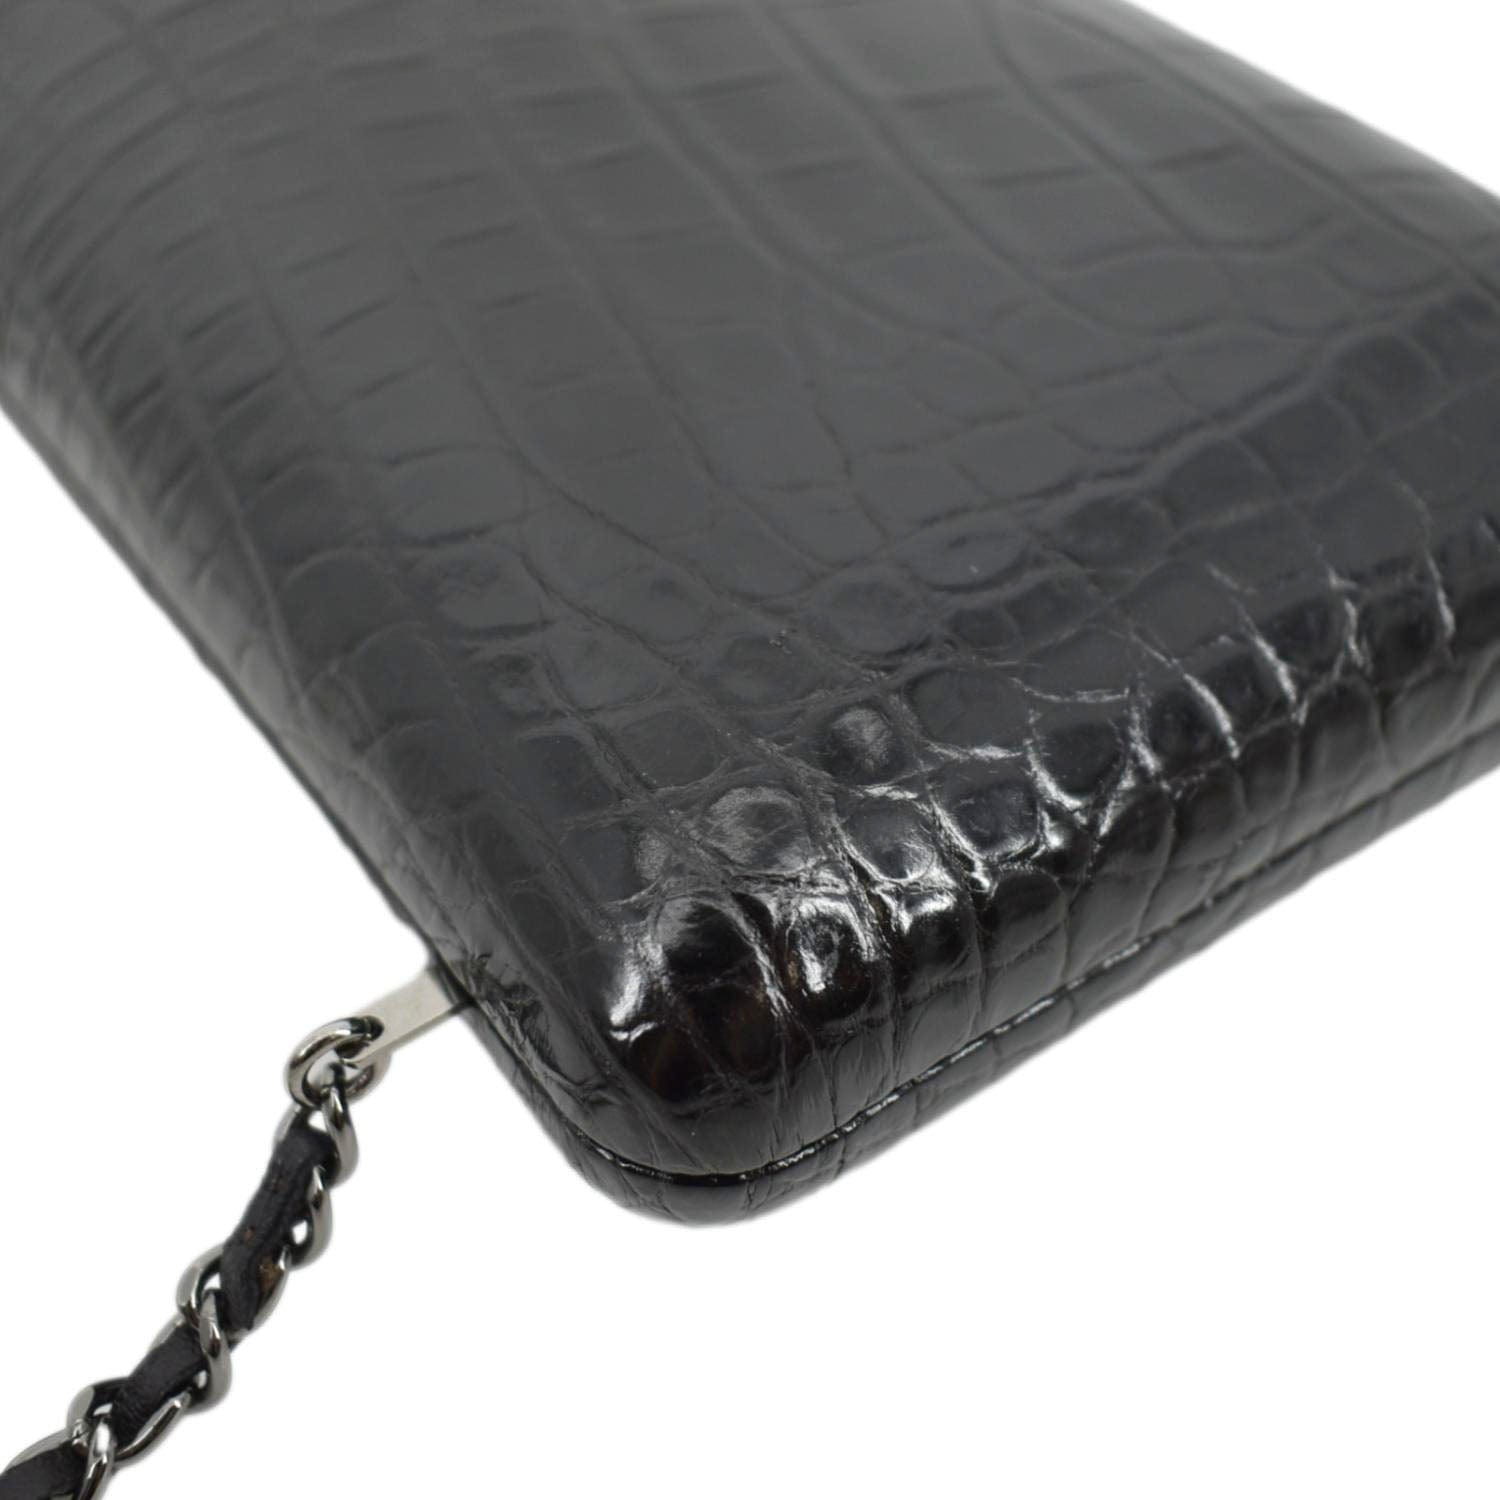 chanel long wallet with chain